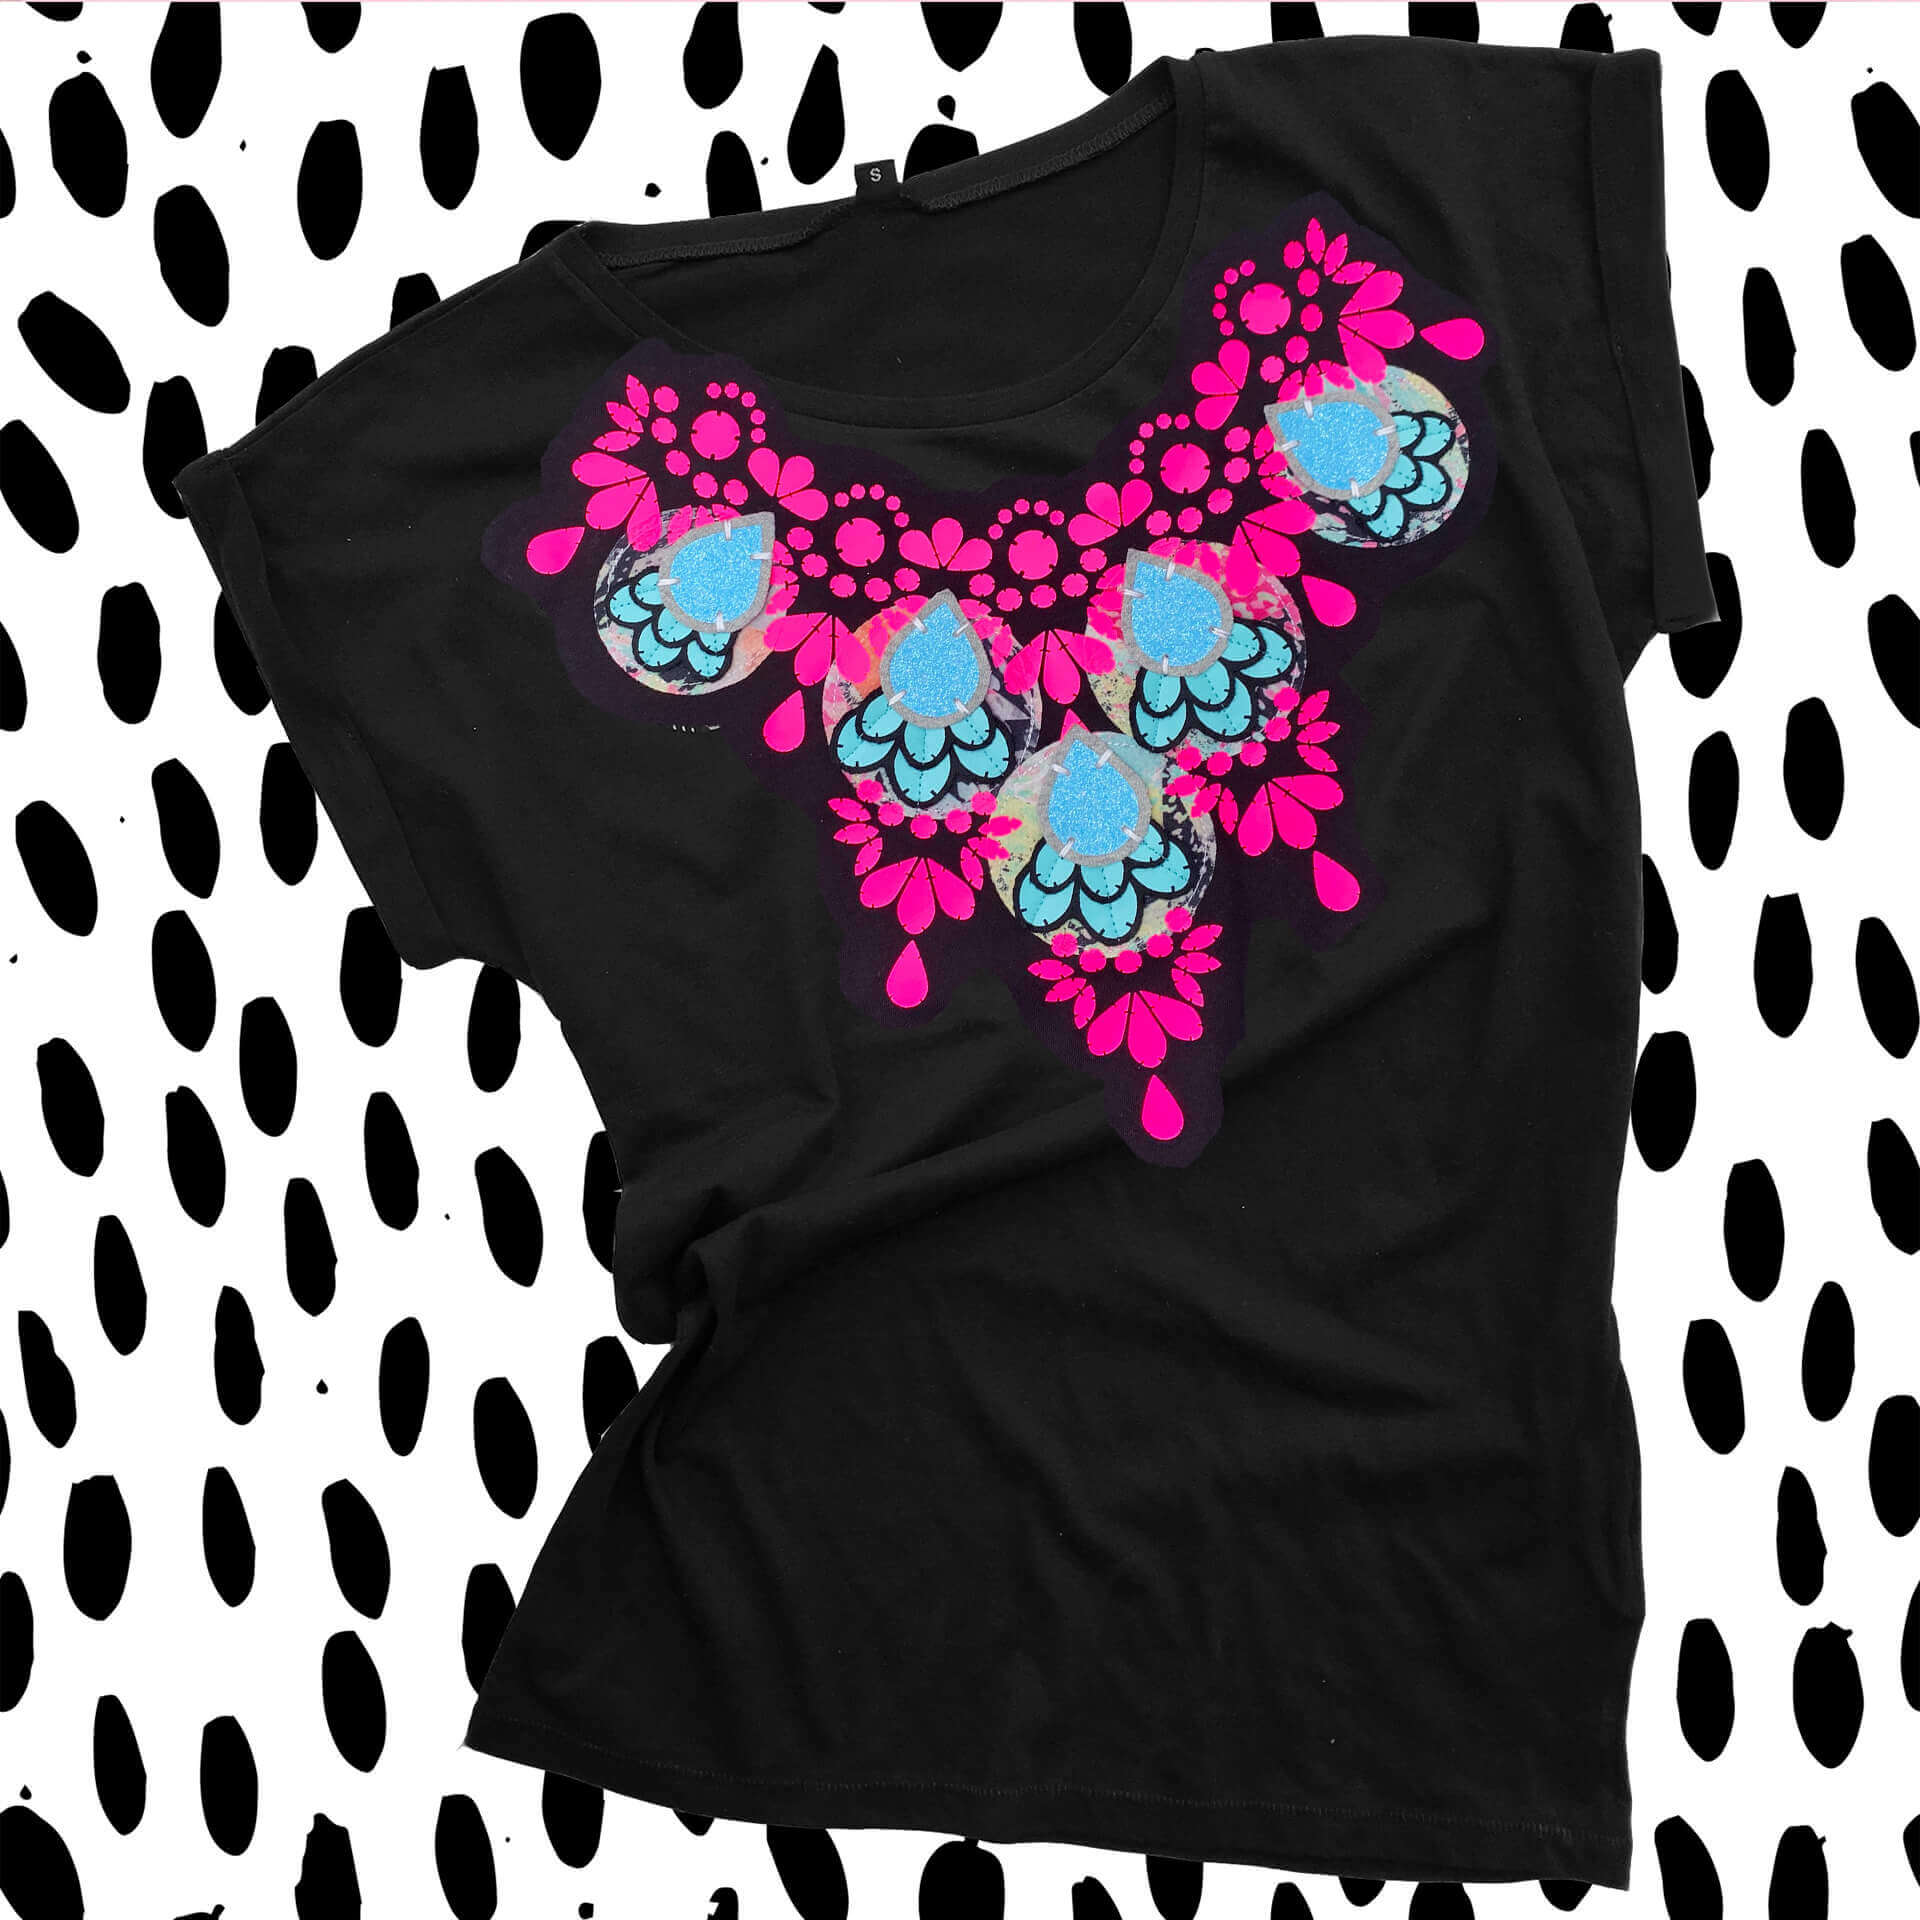 An embellished slim fit T-shirt in black, fluorescent pink and blue, laid flat against a black and white patterned background.